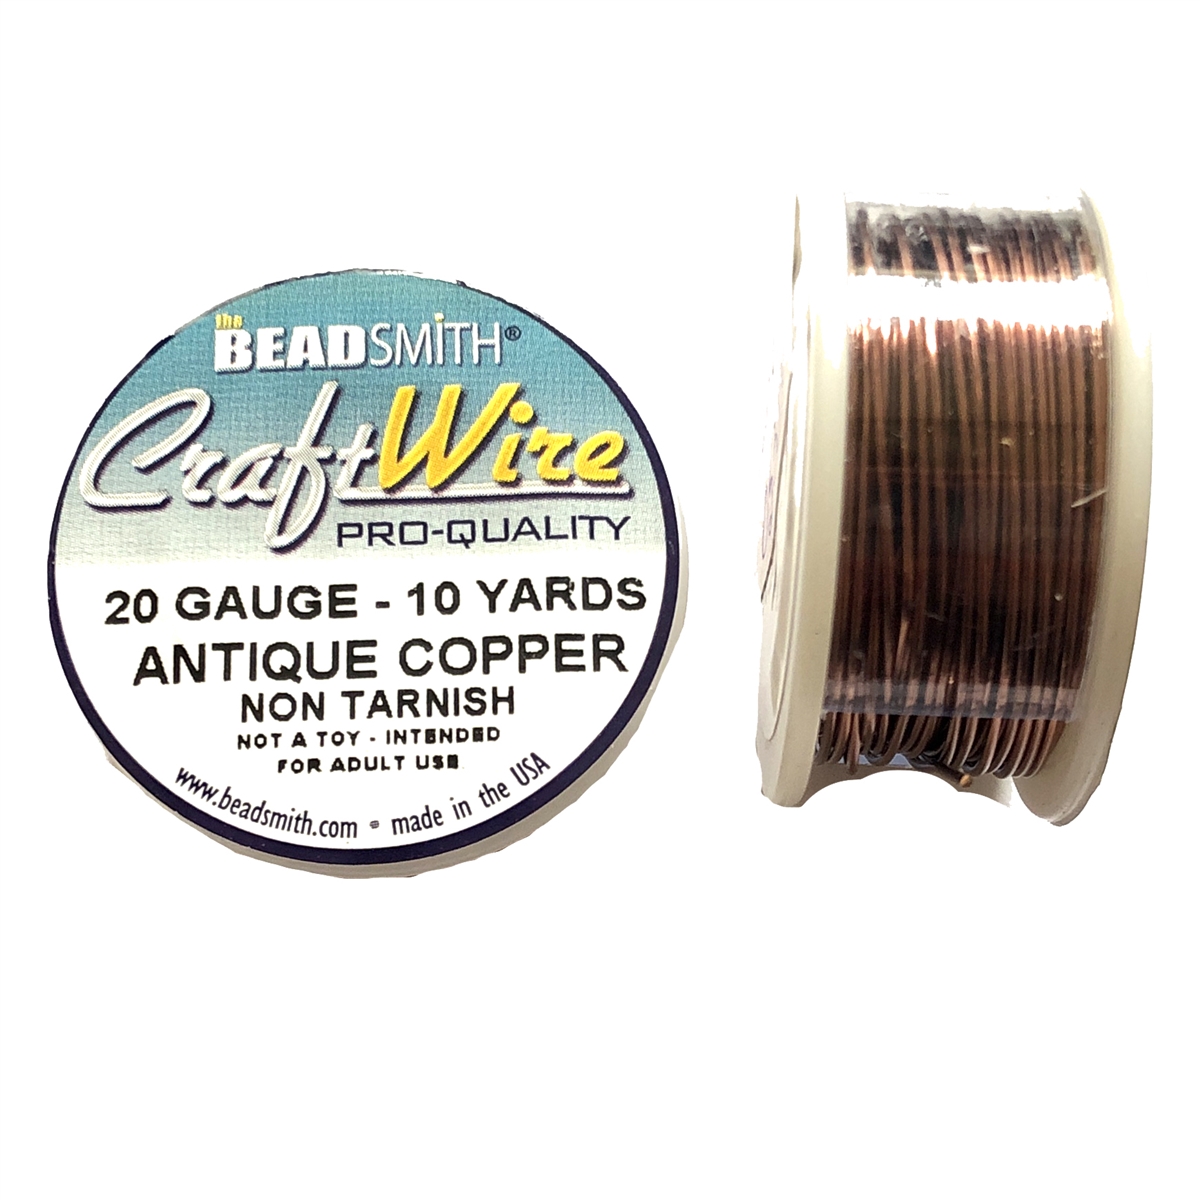 Craft Wire 20 Gauge SILVER PLATED 6 Yards by BeadSmith